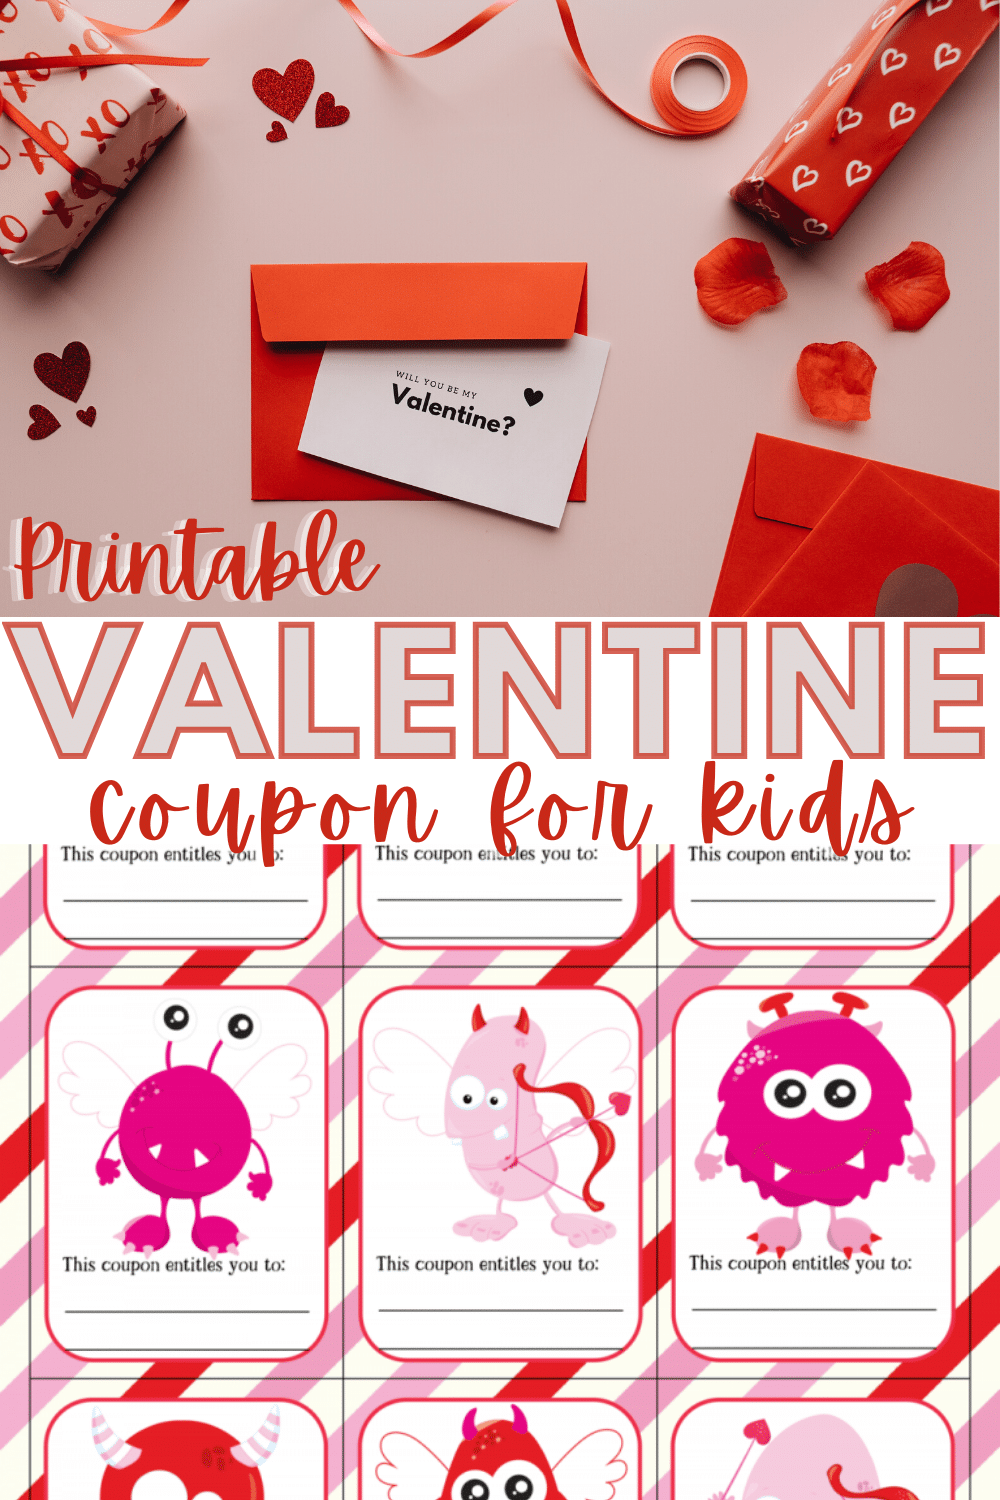 Give your children these Valentine coupons for kids instead of candy to show your love for them. They'll love these kid coupons, no sugar needed! #valentinesday #valentinecoupons #printable #forkids via @wondermomwannab